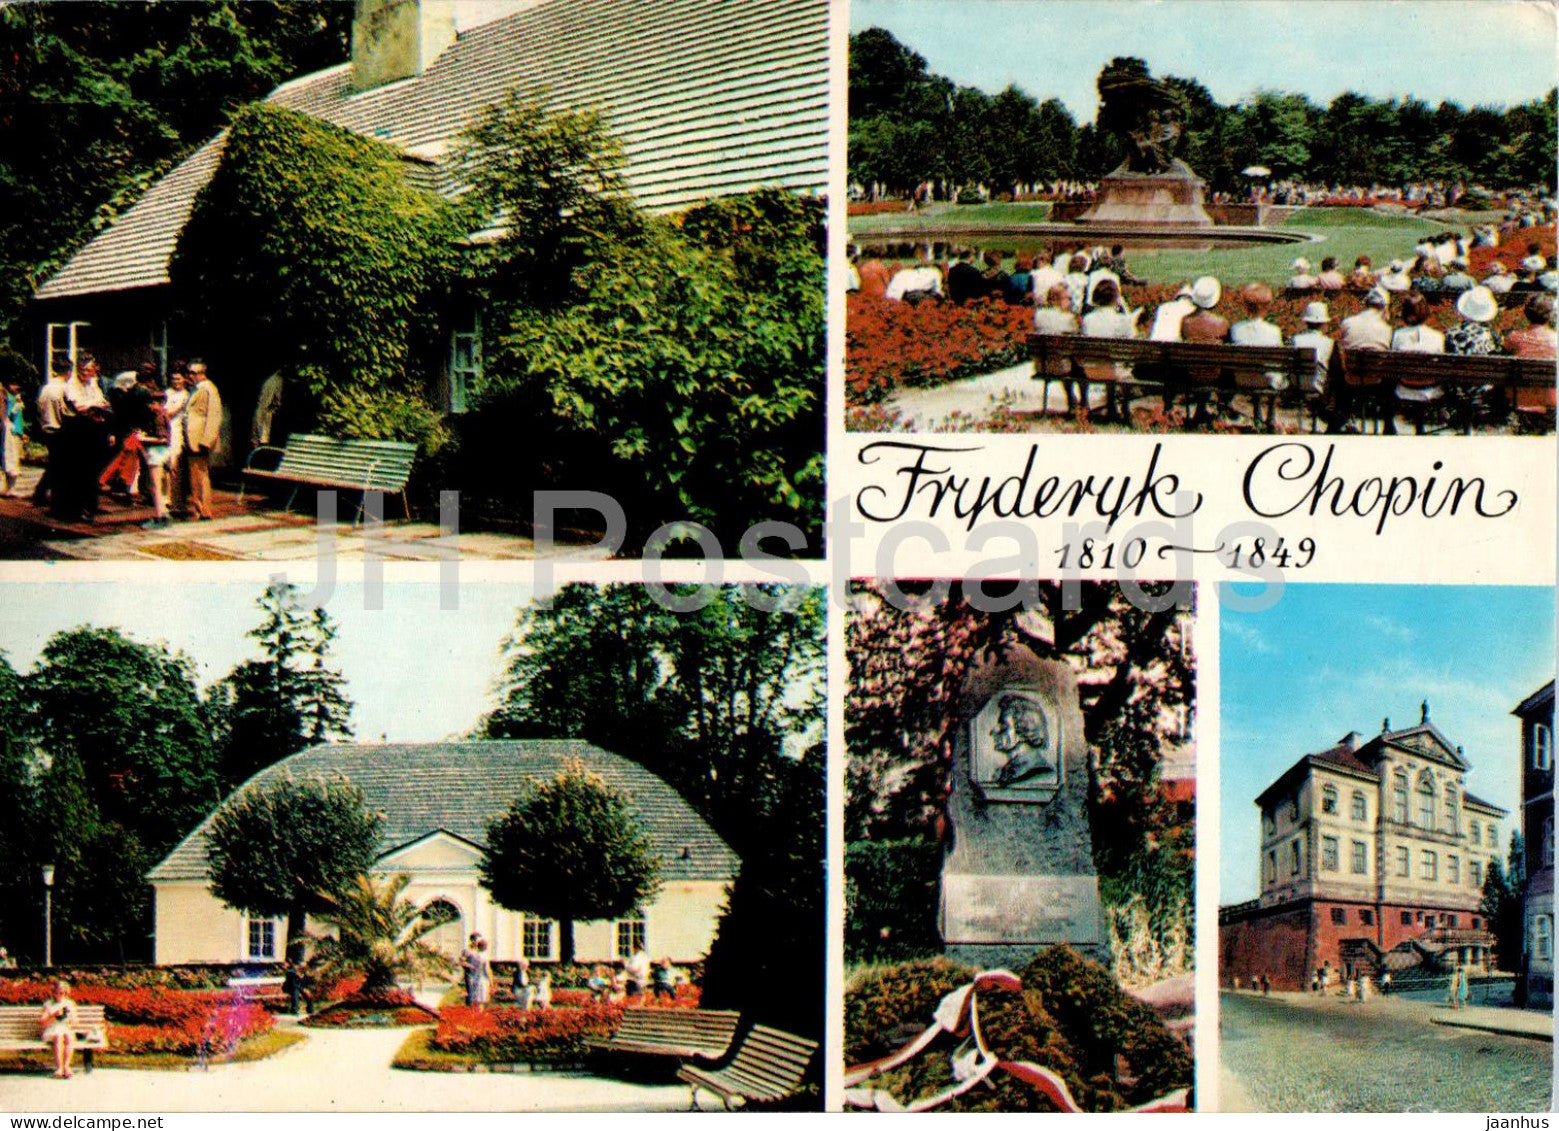 Fryderyk Chopin - composer - places - multiview - 1985 - Poland - used - JH Postcards